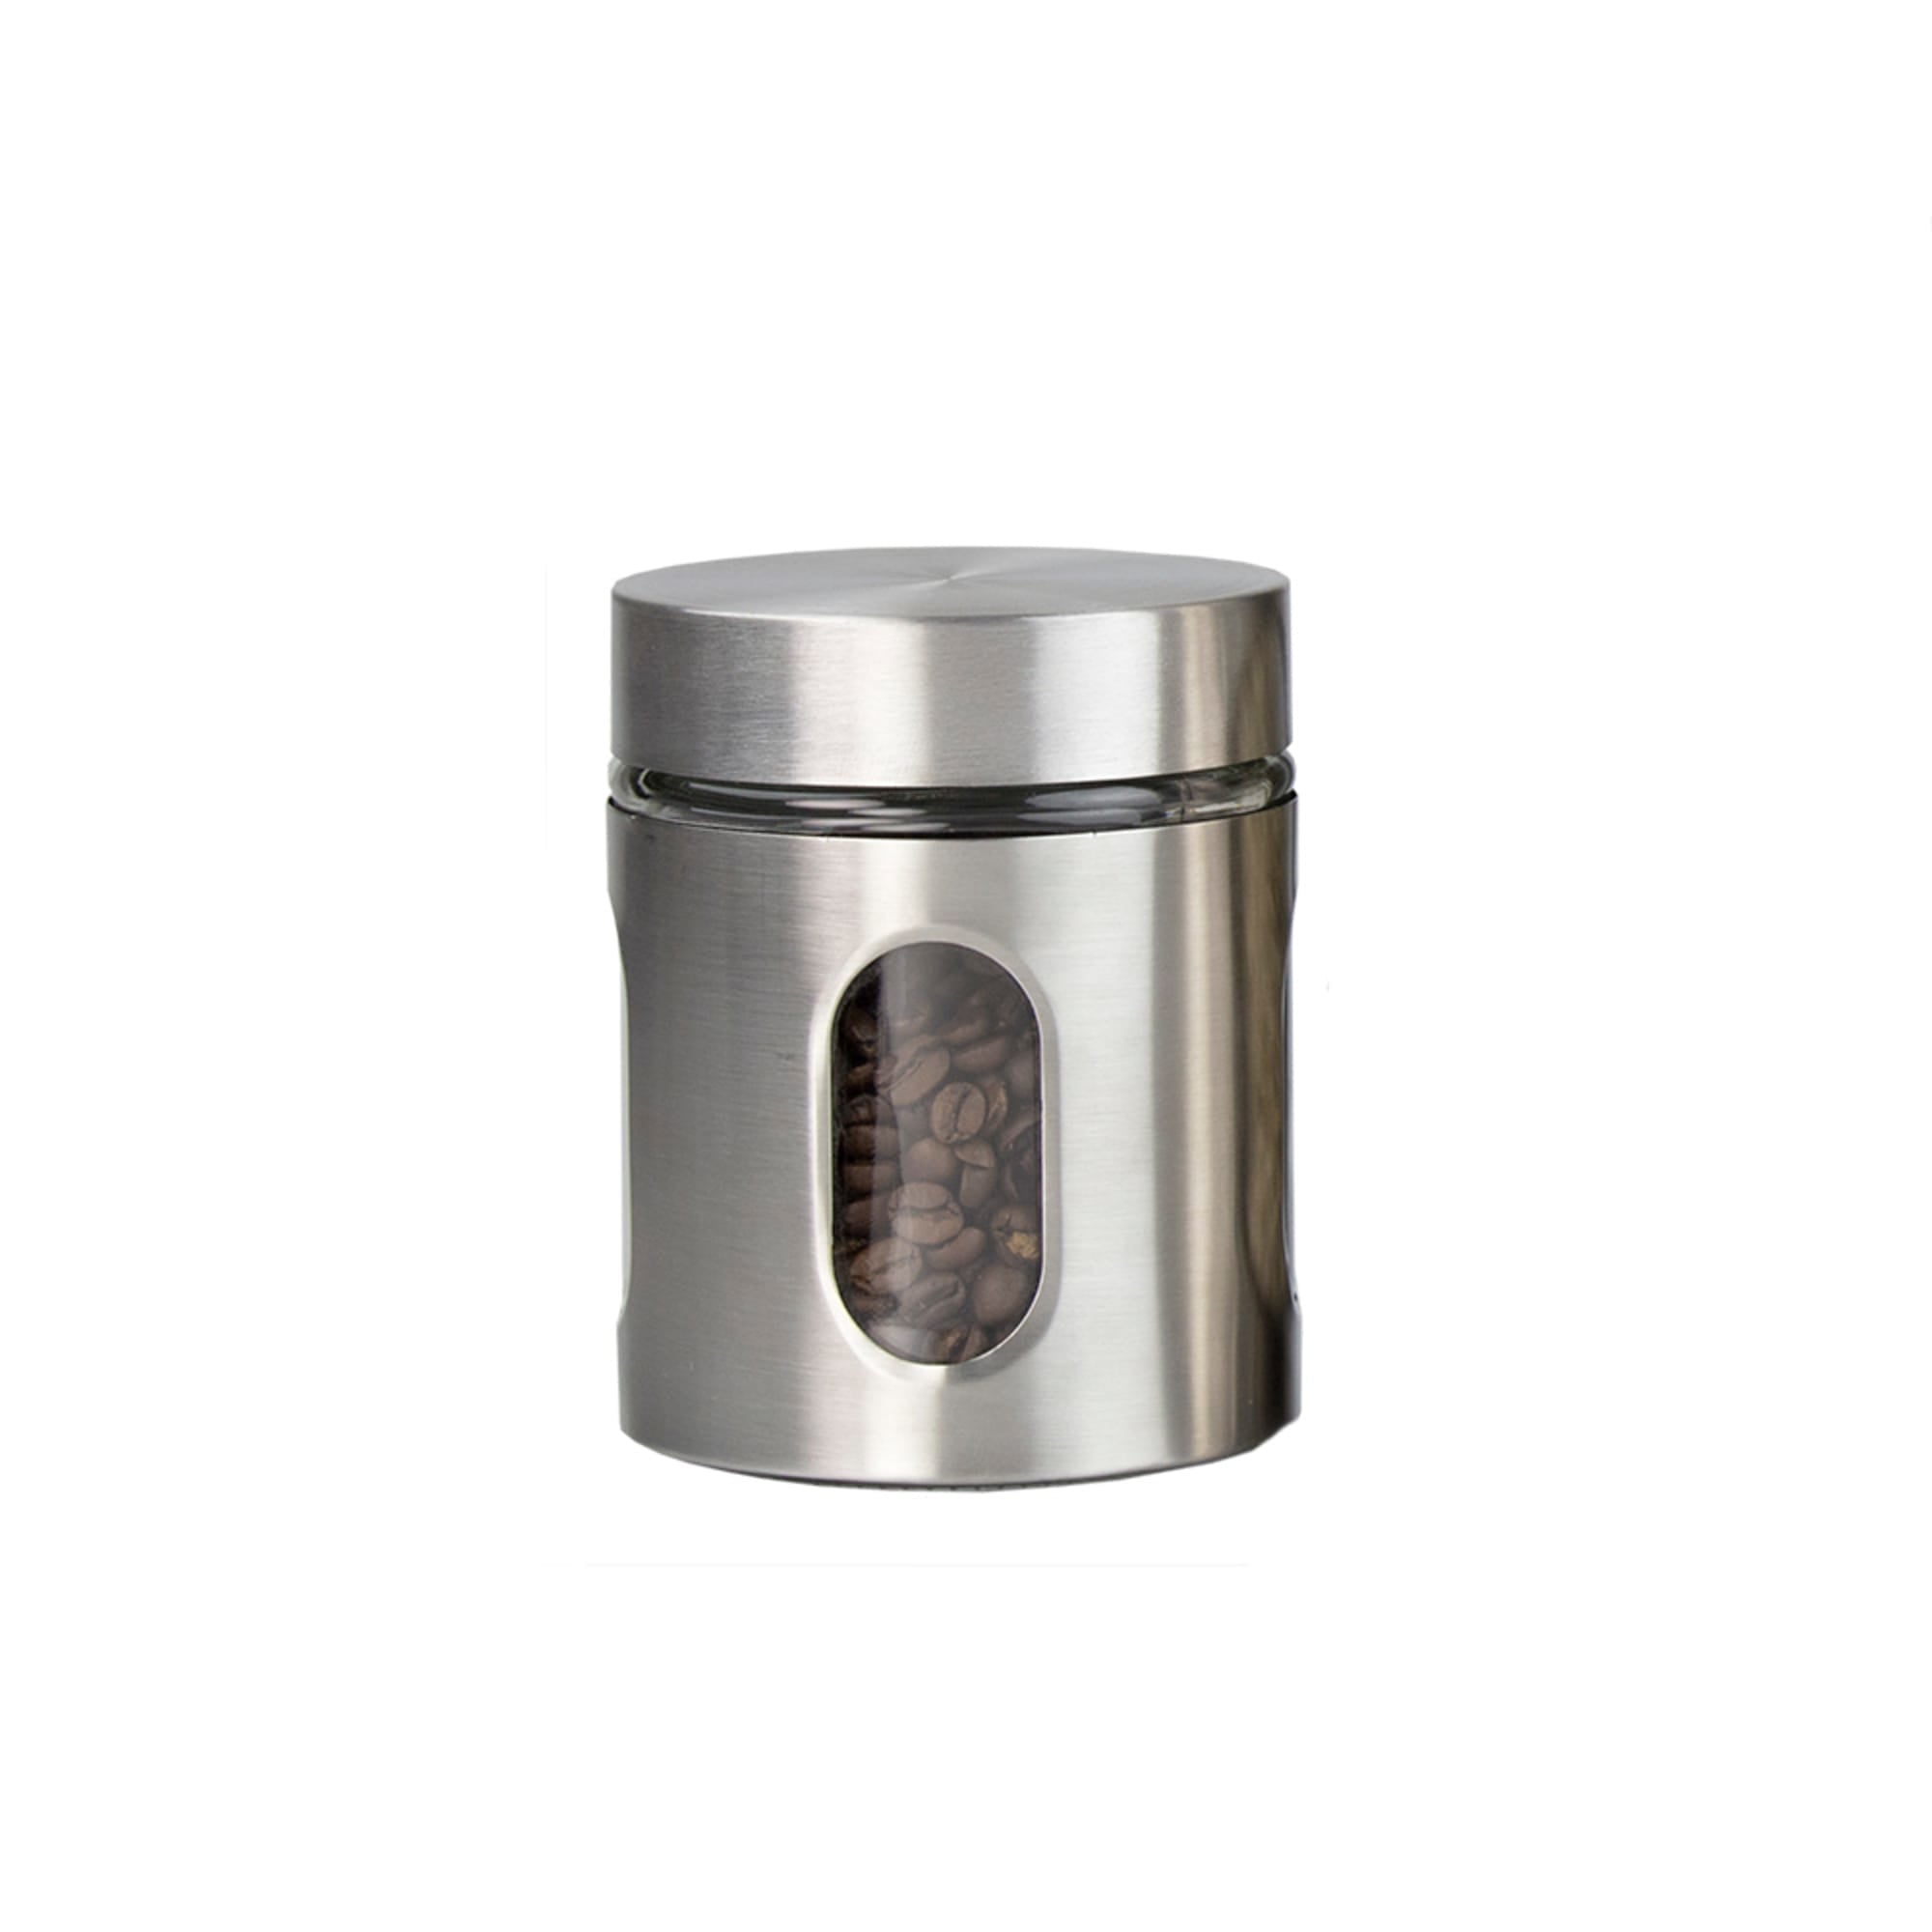 Home Basics 4 Piece Metal Canister Set $20.00 EACH, CASE PACK OF 4